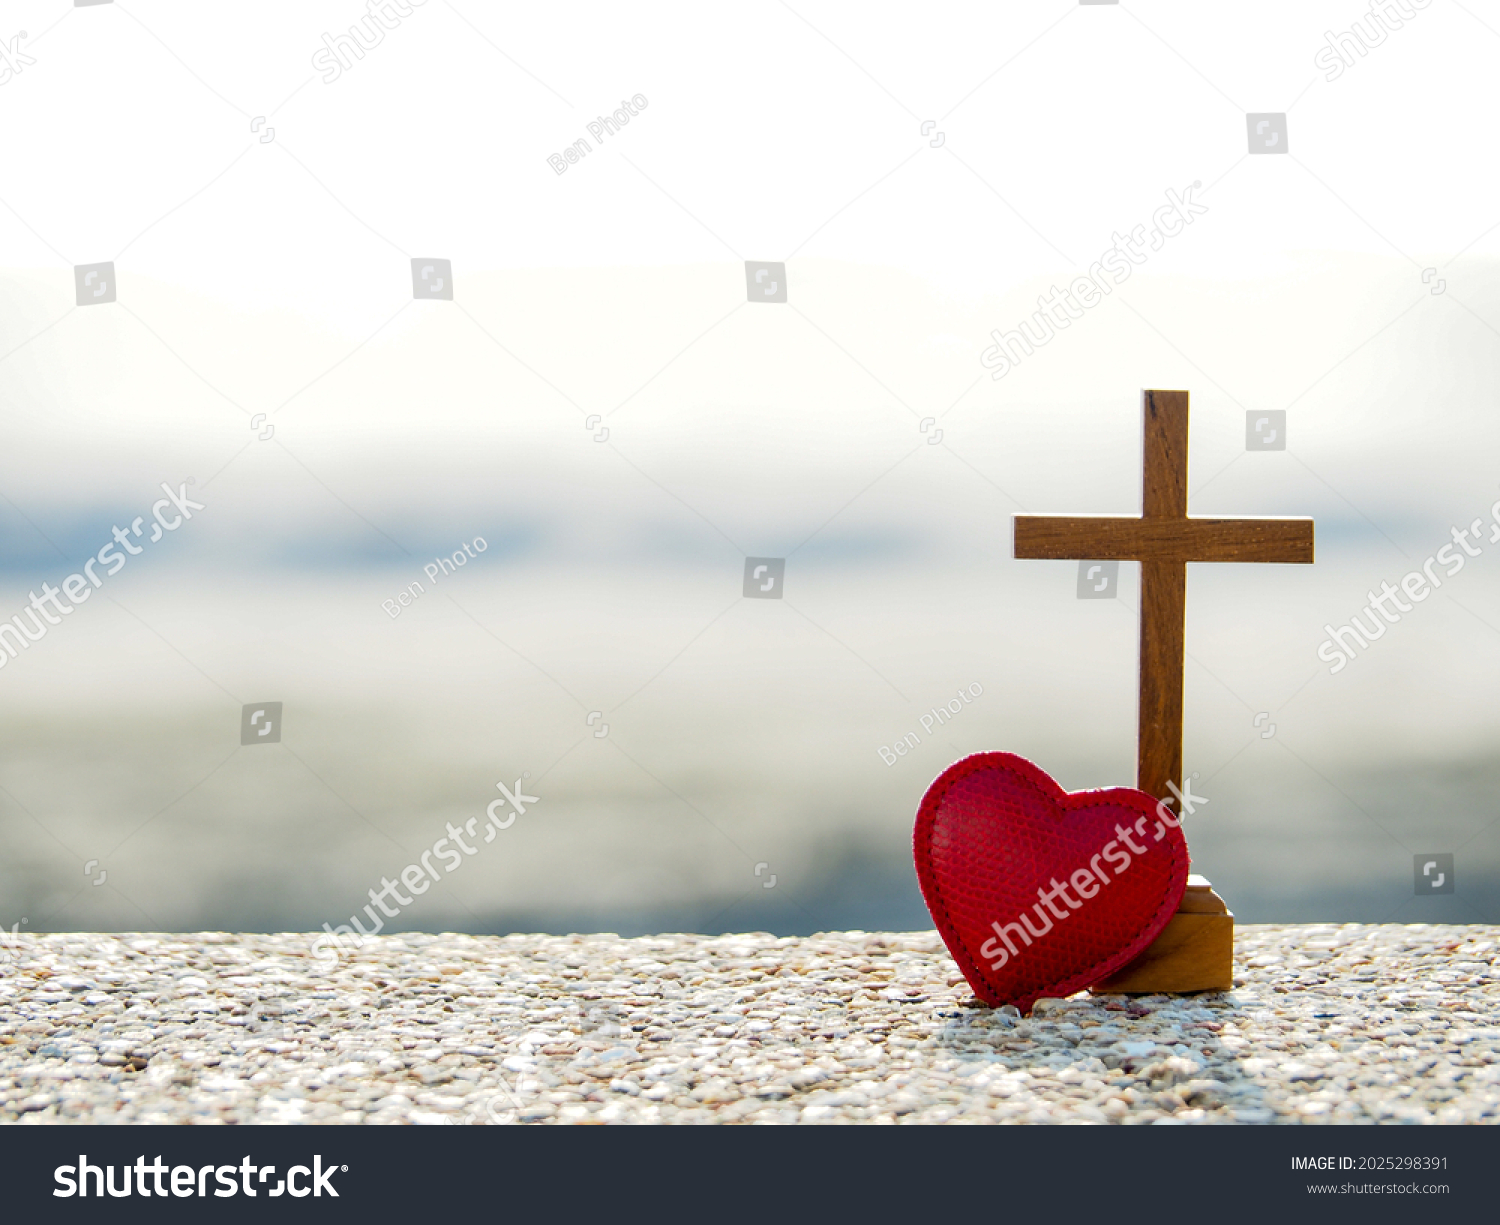 Red heart with wooden Christian cross on gravel floor in morning light, beach sea as background. Jesus love you. Faith hope believe in God. Believe in salvation. Christianity background concept. #2025298391